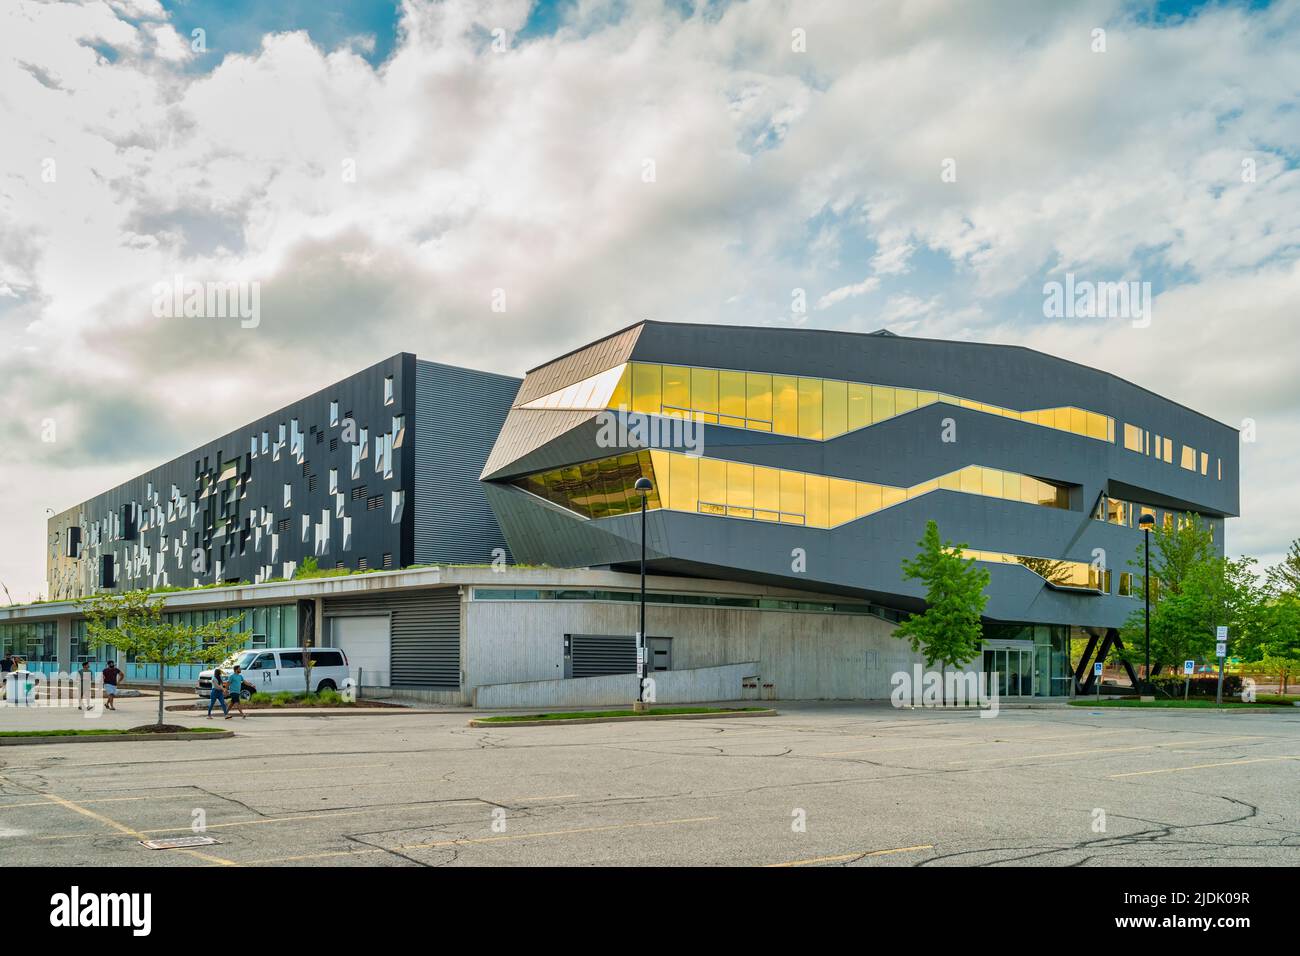 Perimeter Institute for Theoretical Physics building in Downtown Waterloo, Ontario, Canada. Foto Stock